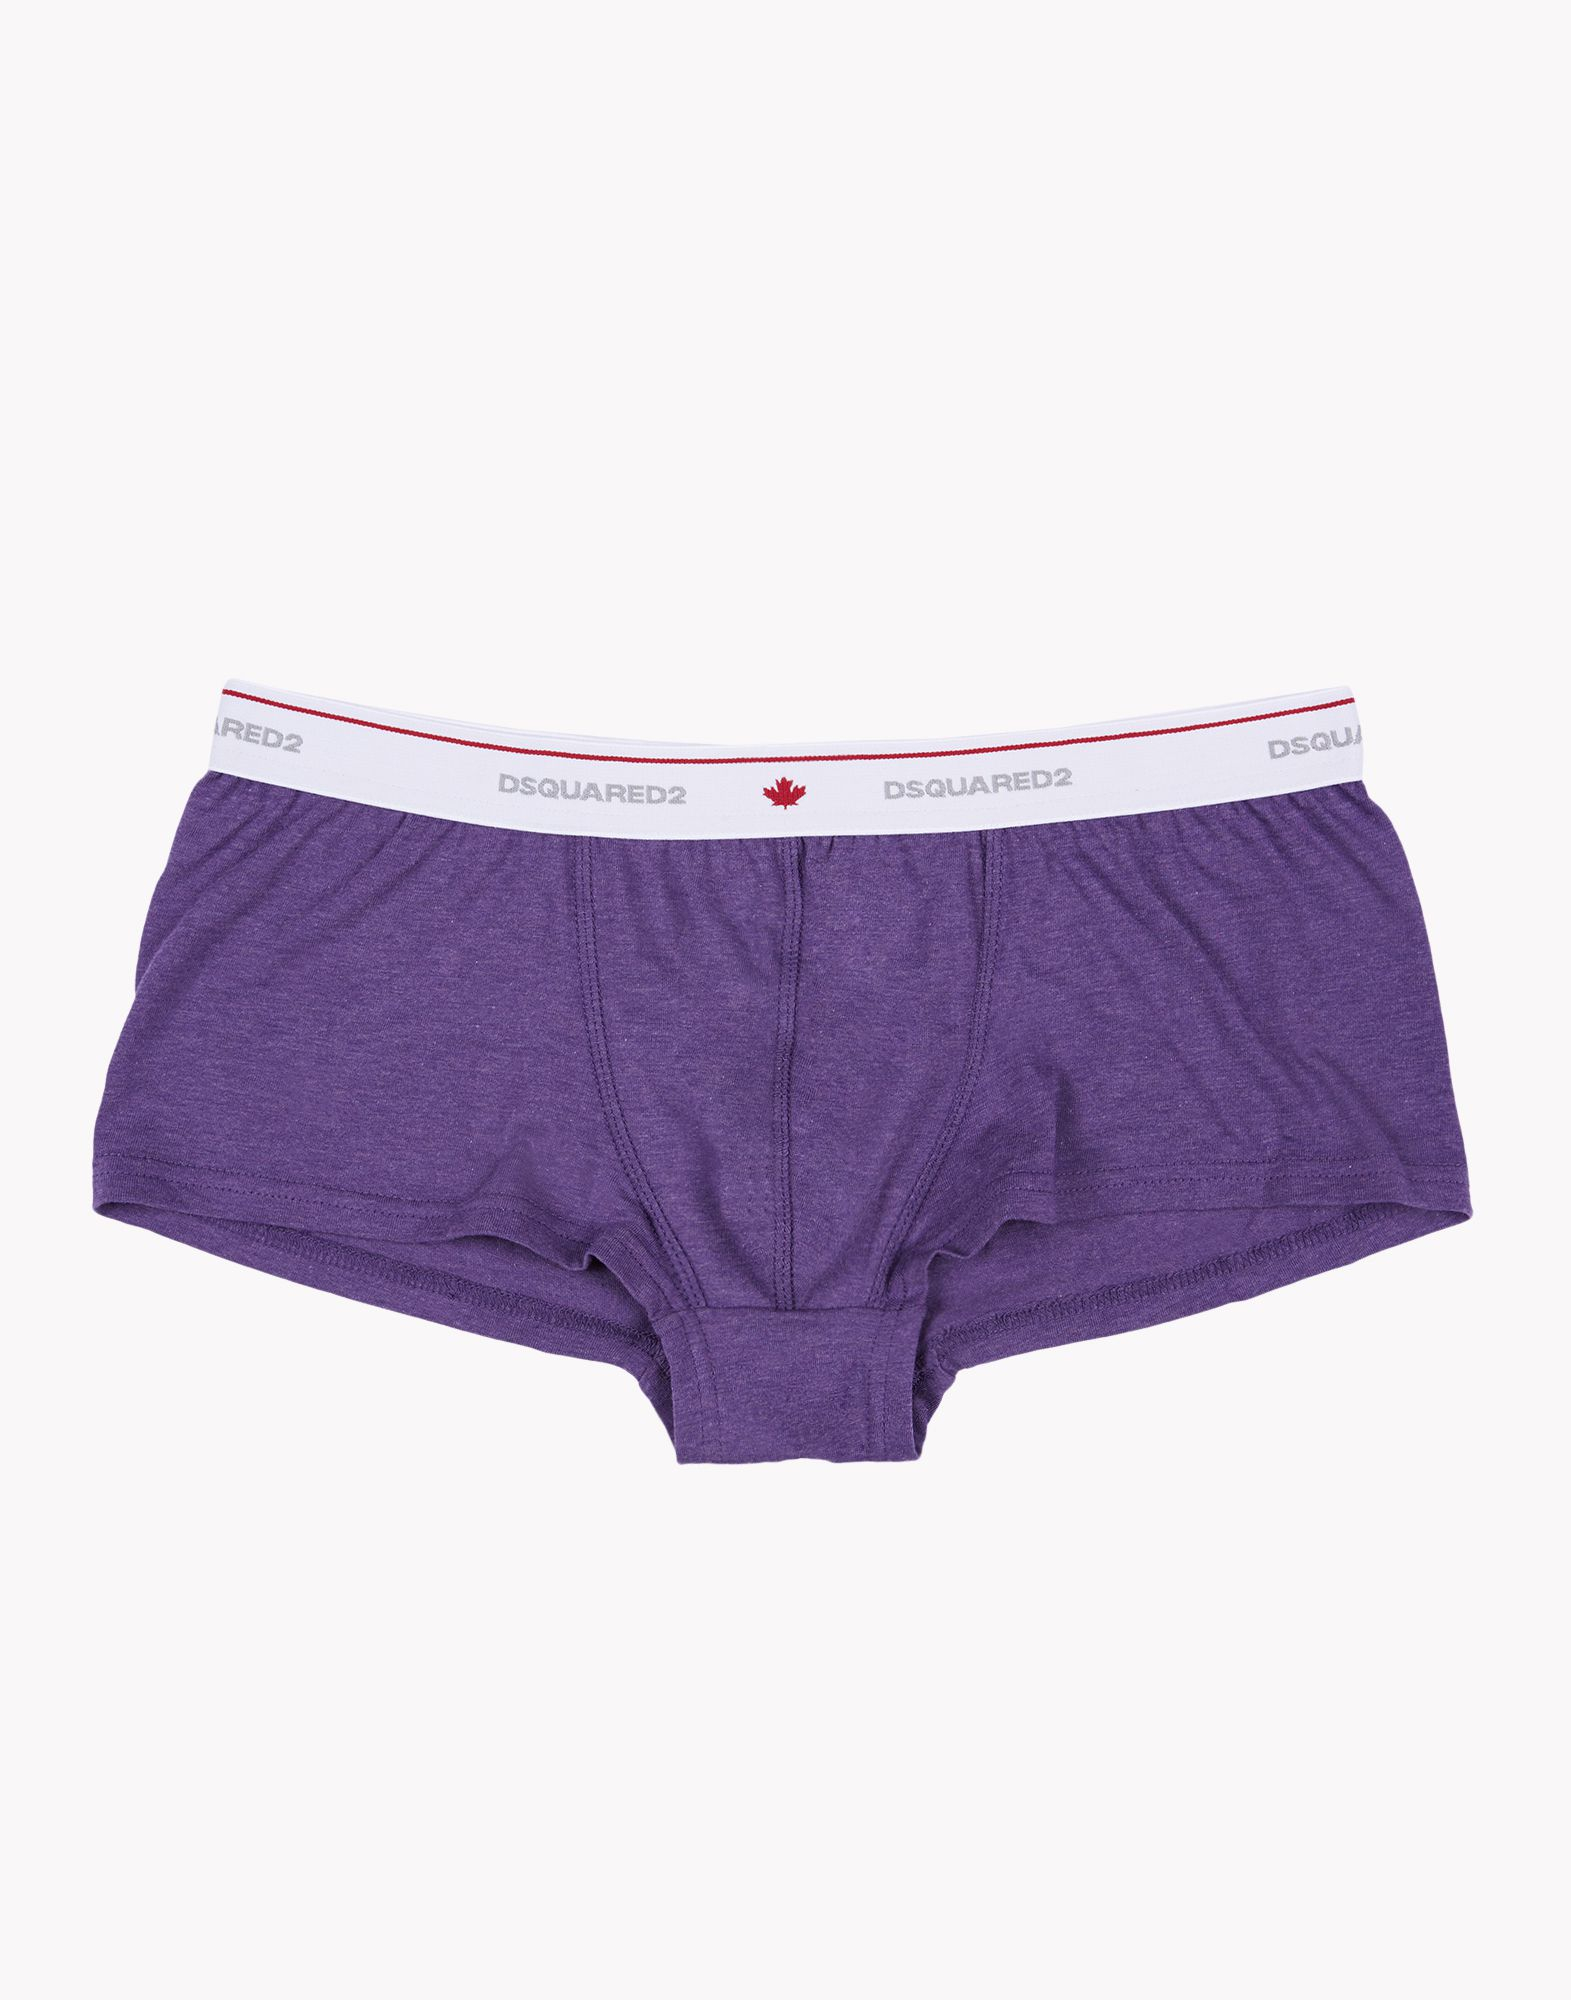 Lyst - Dsquared² Boxer in Purple for Men